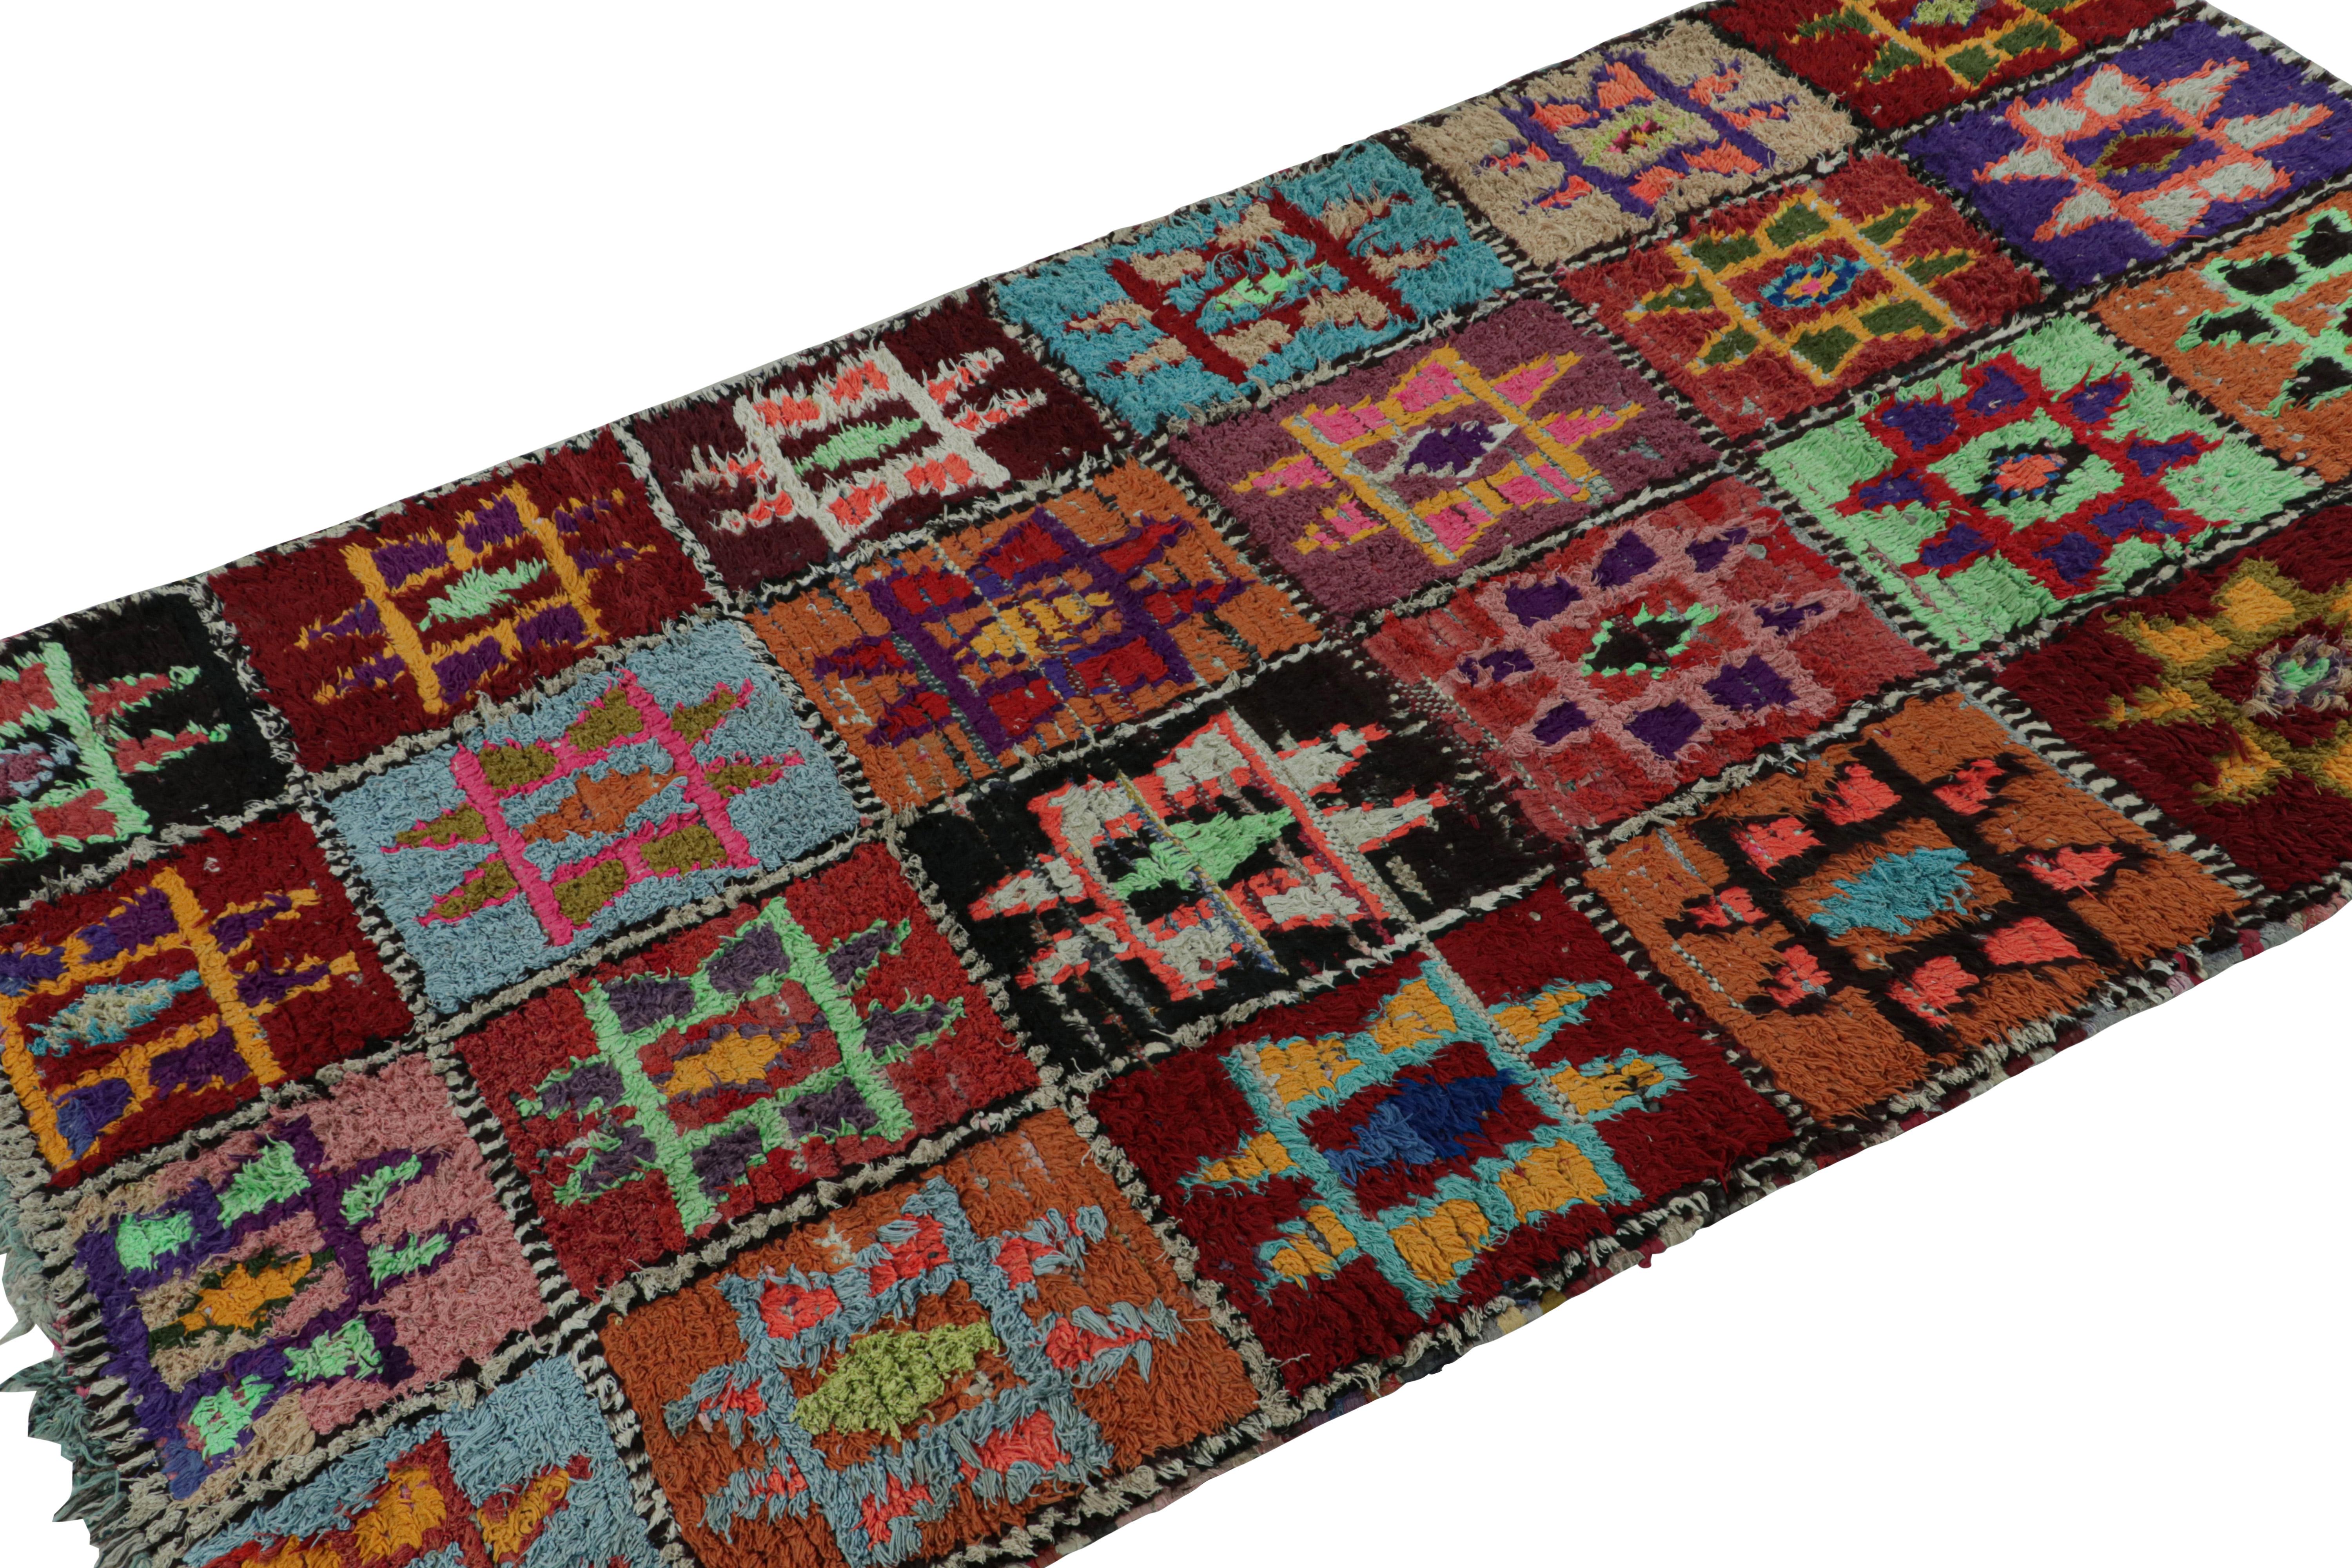 Hand-knotted in wool and cotton circa 1950-1960, this vintage 4x8 Moroccan rug is believed to hail from the Azilal tribe. 

On the Design: 

This rug enjoys a whimsical play of colors in the archaic geometric patterns. Keen eyes will further admire